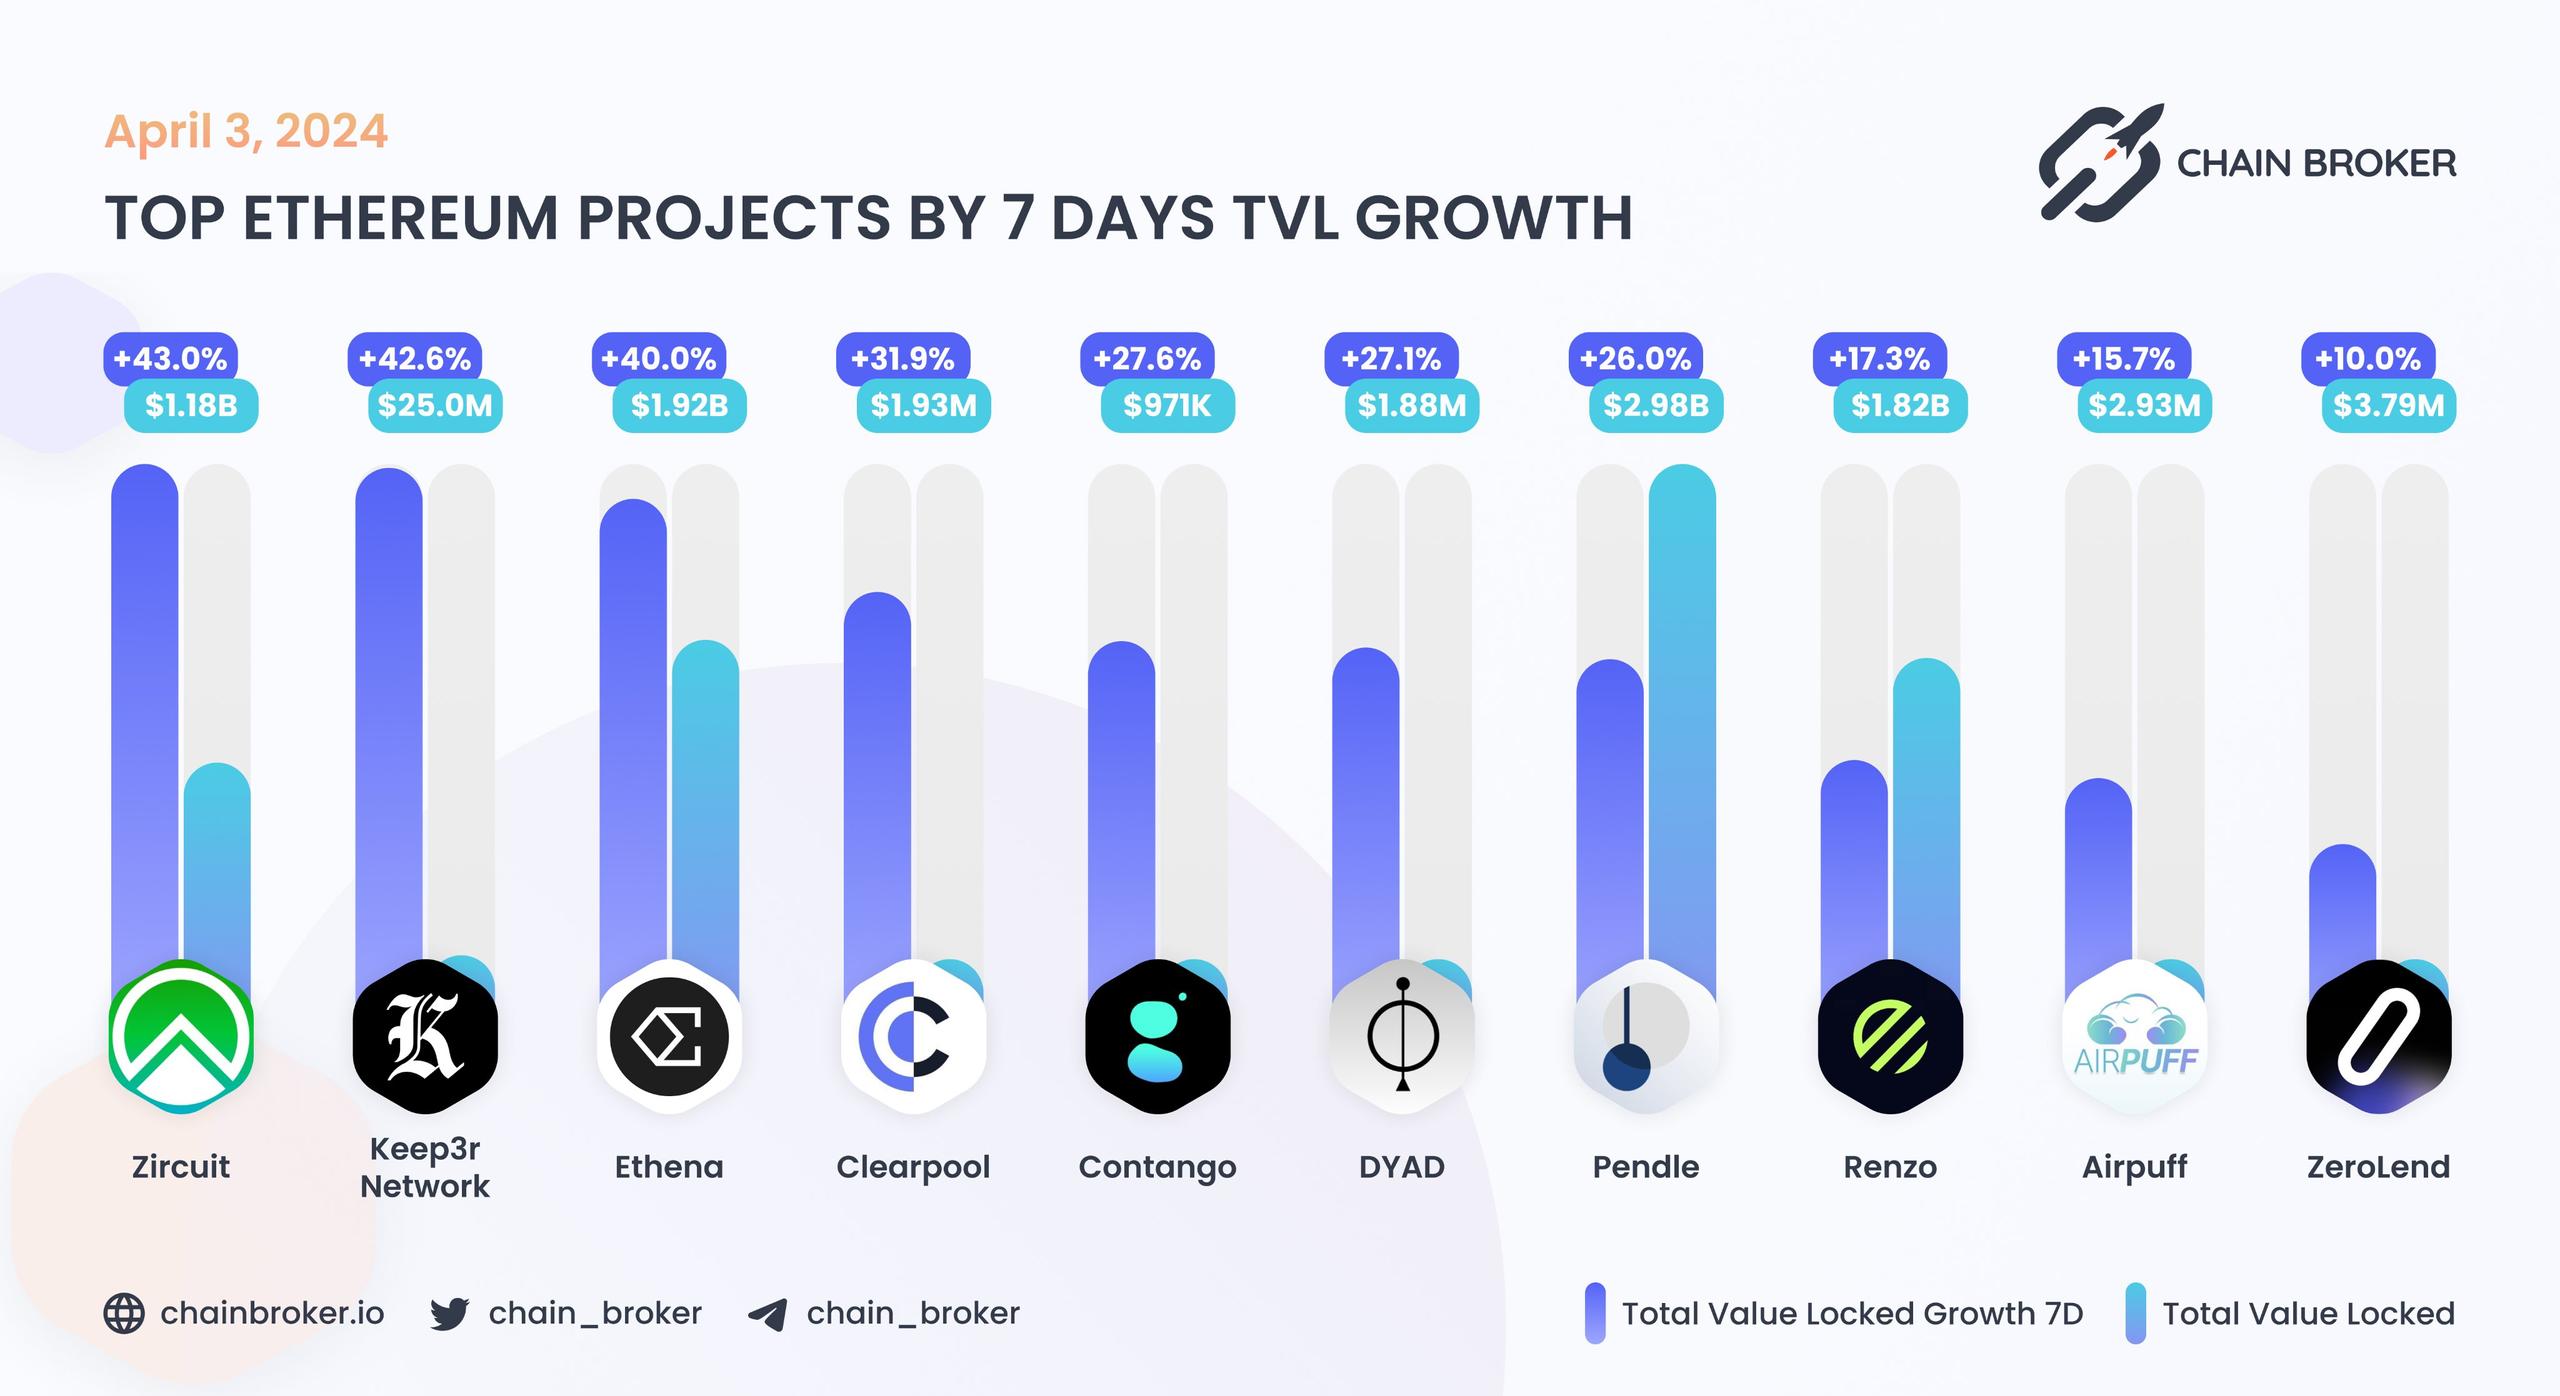 Top Ethereum projects by 7D TVL growth